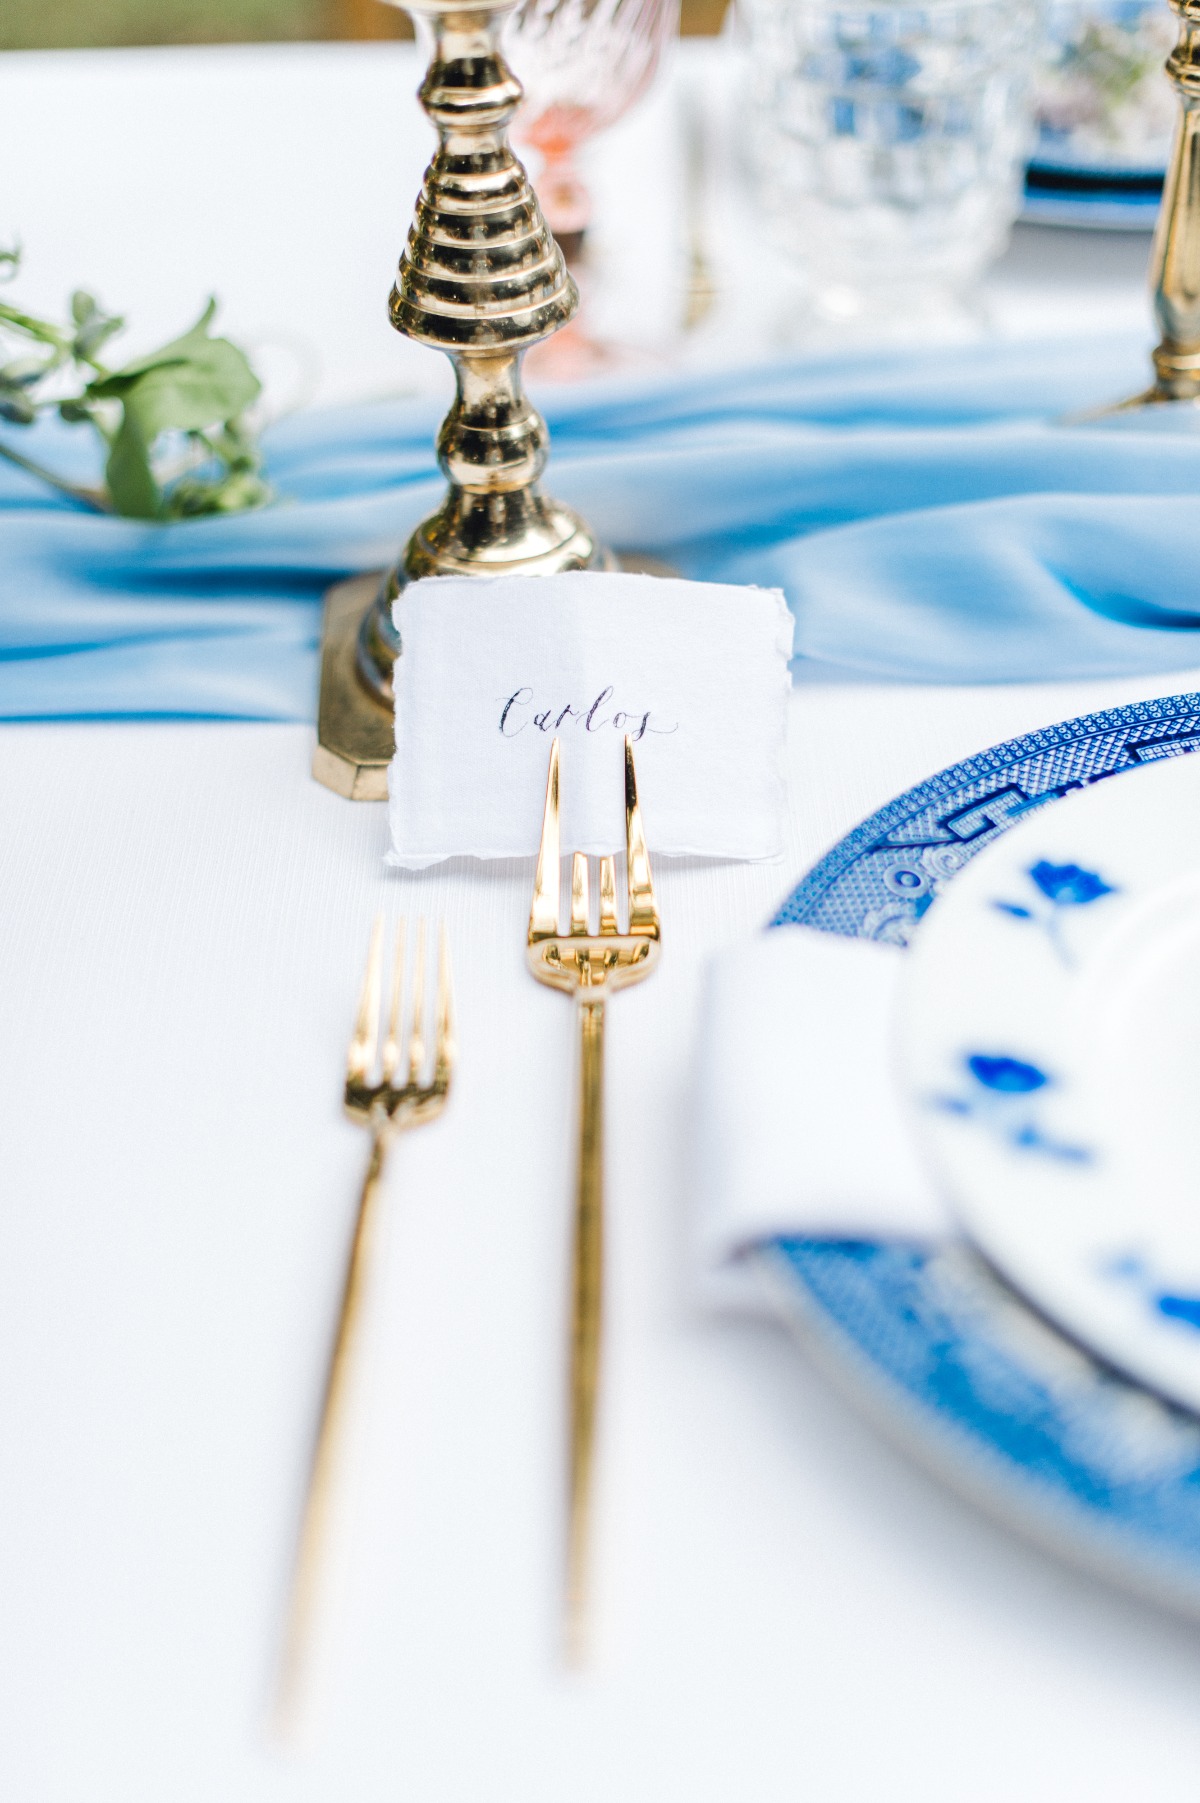 Use a fork as your wedding place card holder